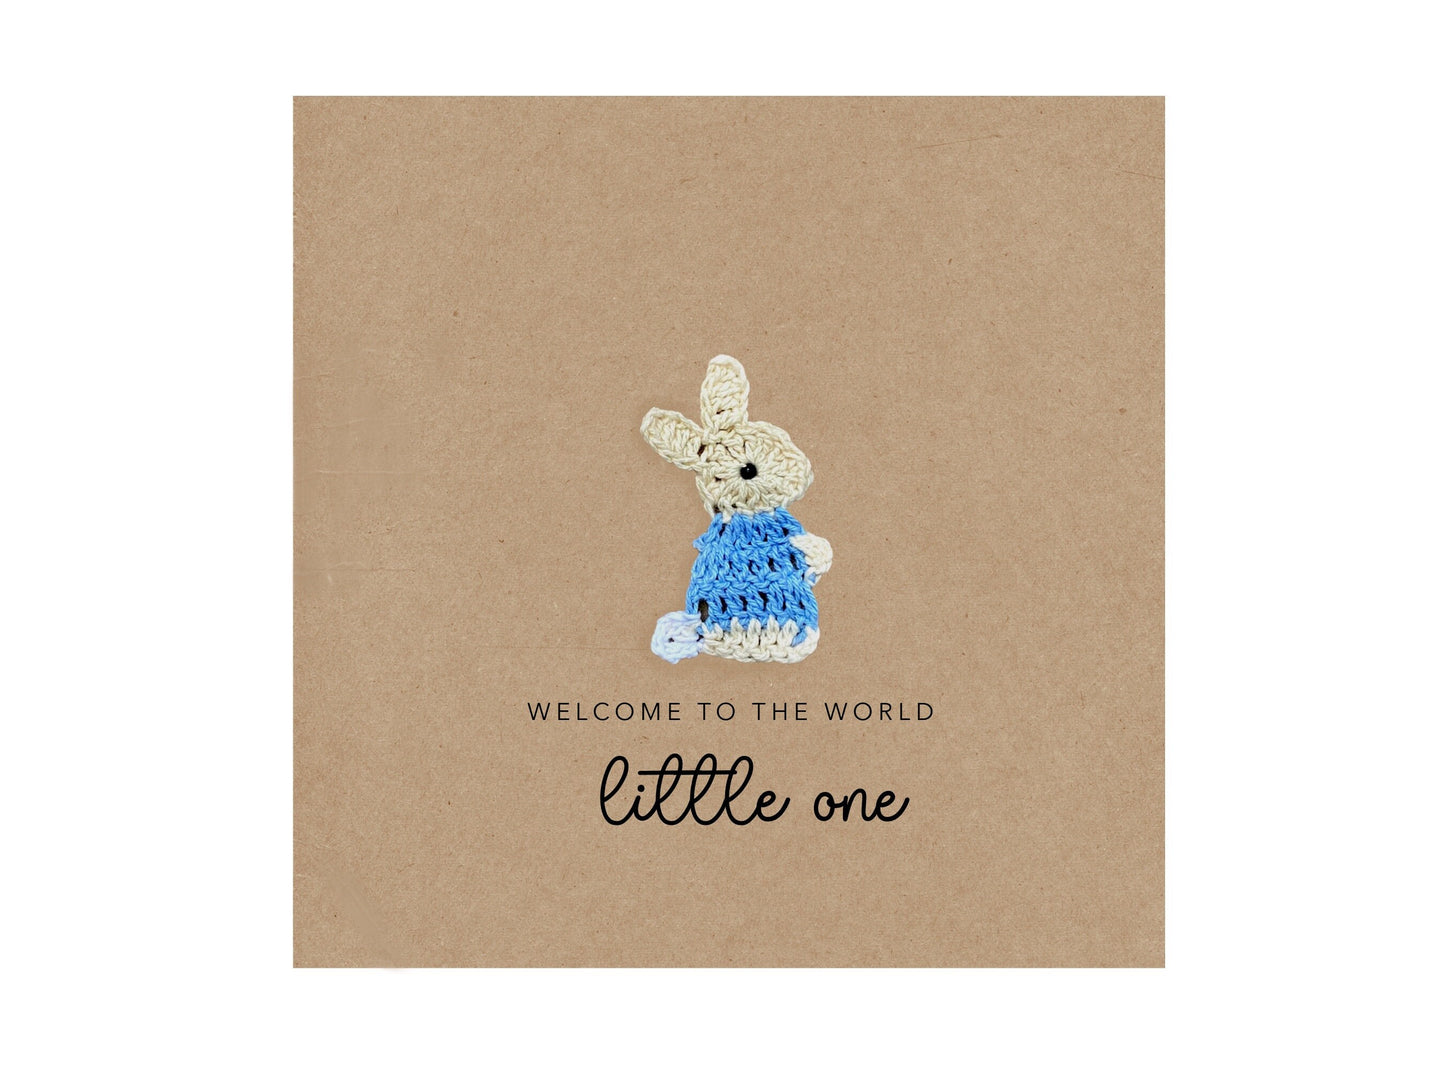 New Baby Card, Keepsake Baby Card, Custom Welcome to the World Card, Baby Congratulations, New Arrival Baby Card, Keepsake, Welcome Baby